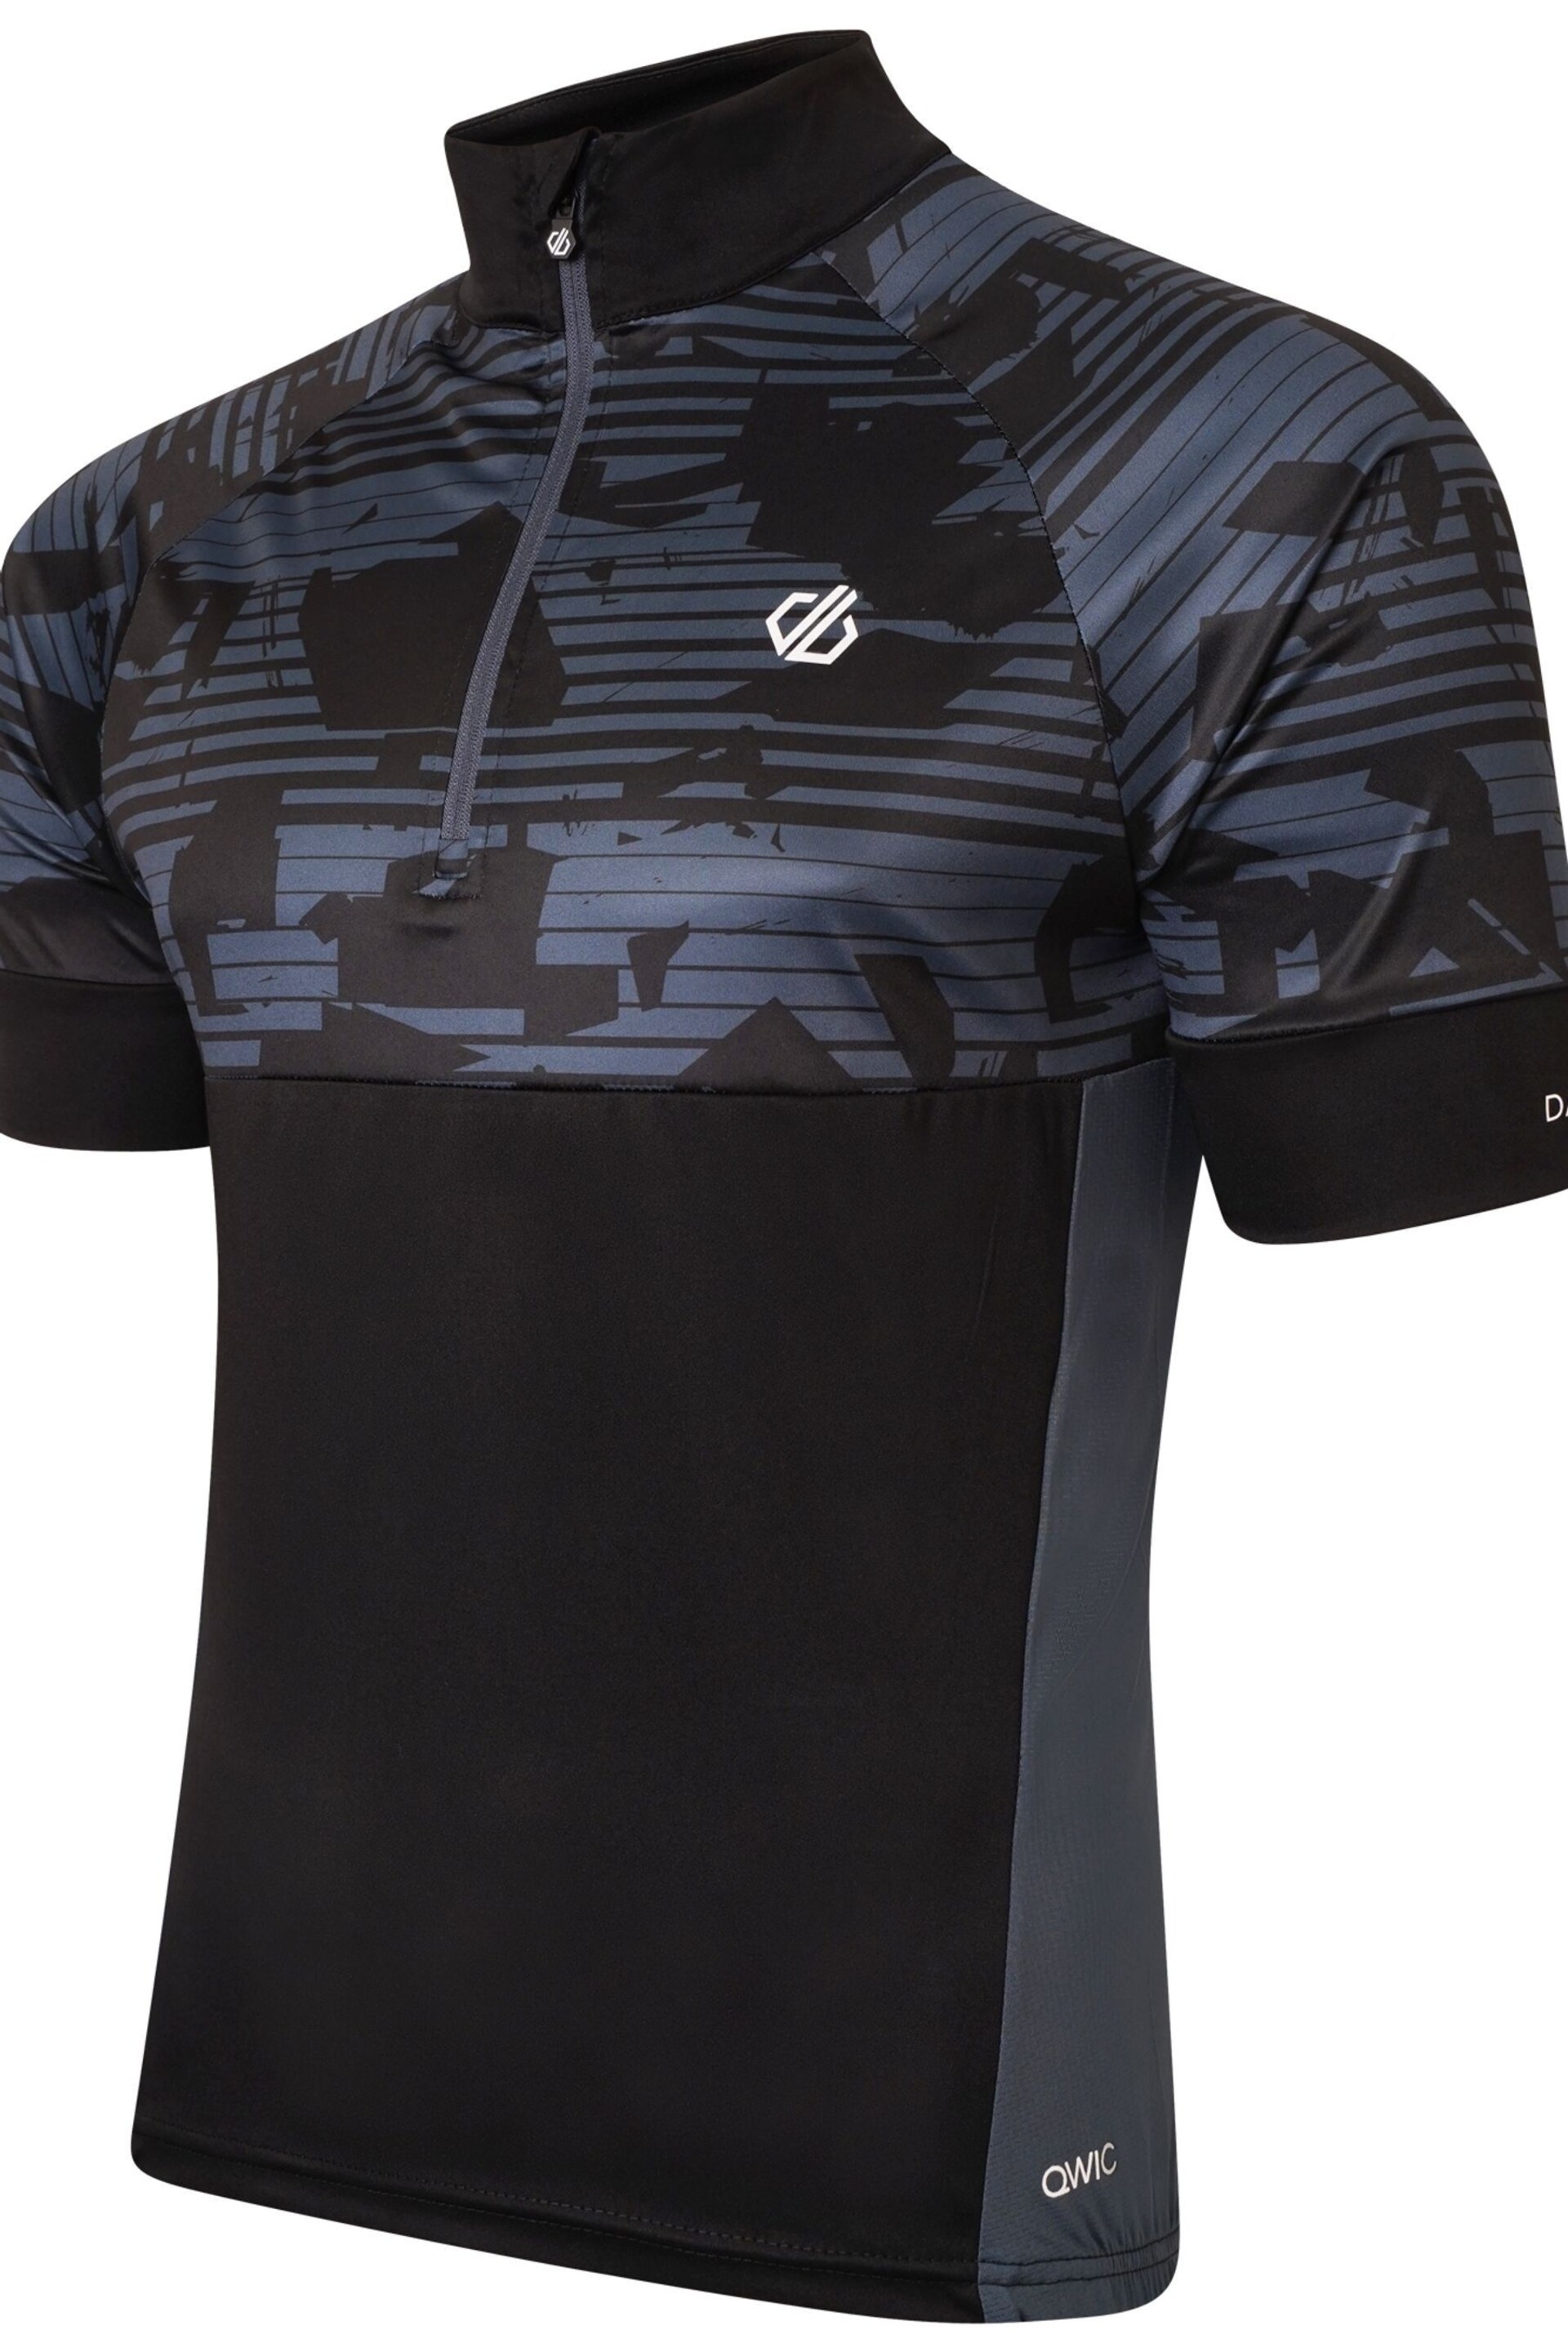 Dare 2b Stay The Course II Black Jersey - Image 2 of 3